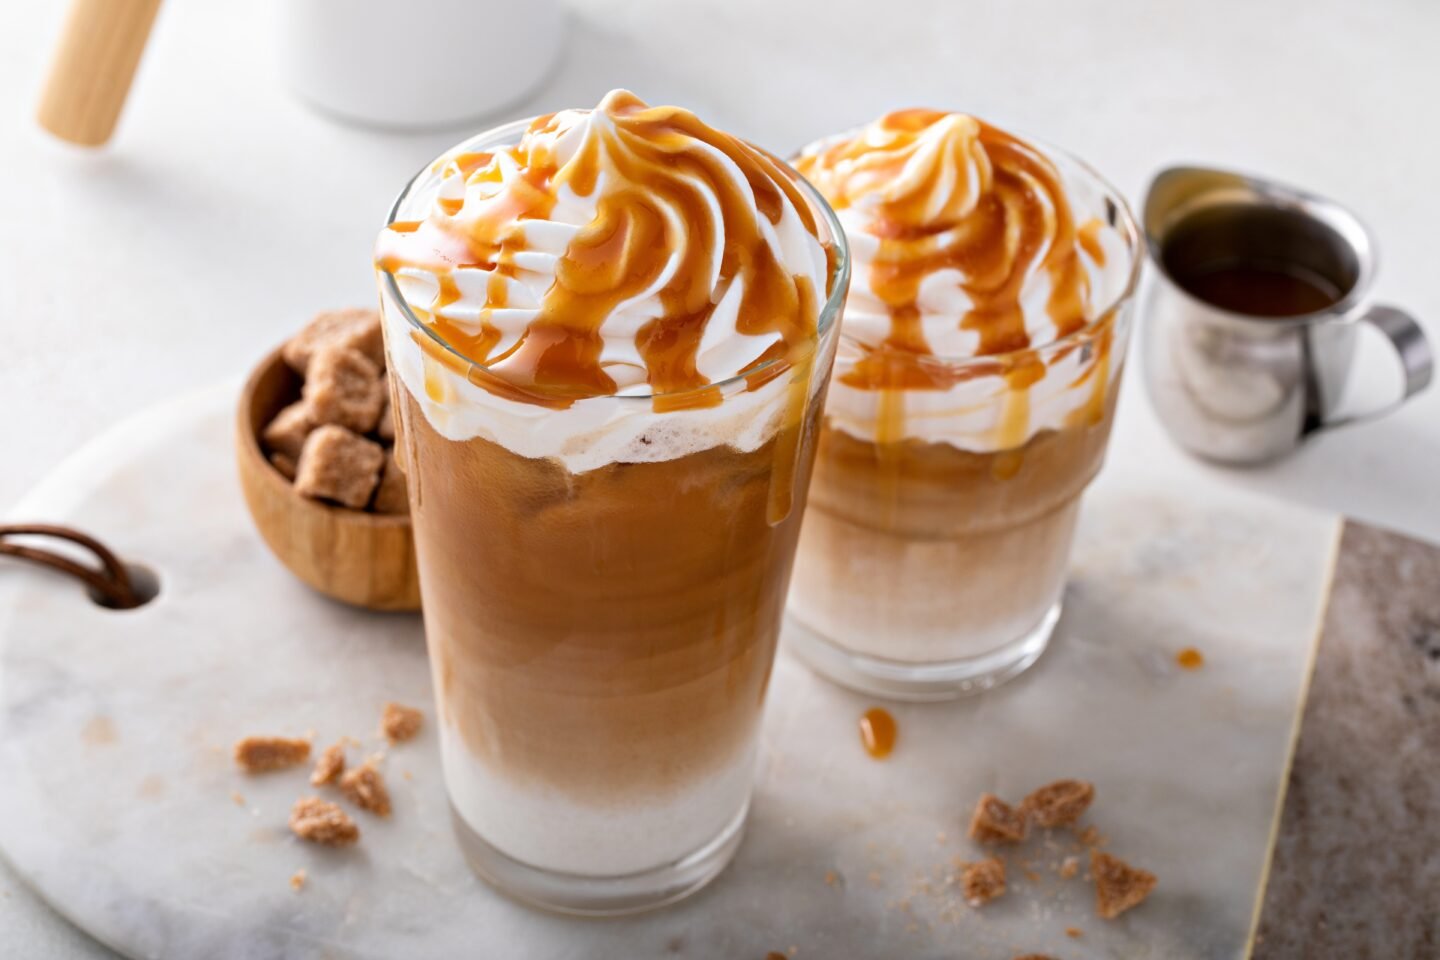 Iced,Caramel,Latte,Topped,With,Whipped,Cream,And,Caramel,Sauce,